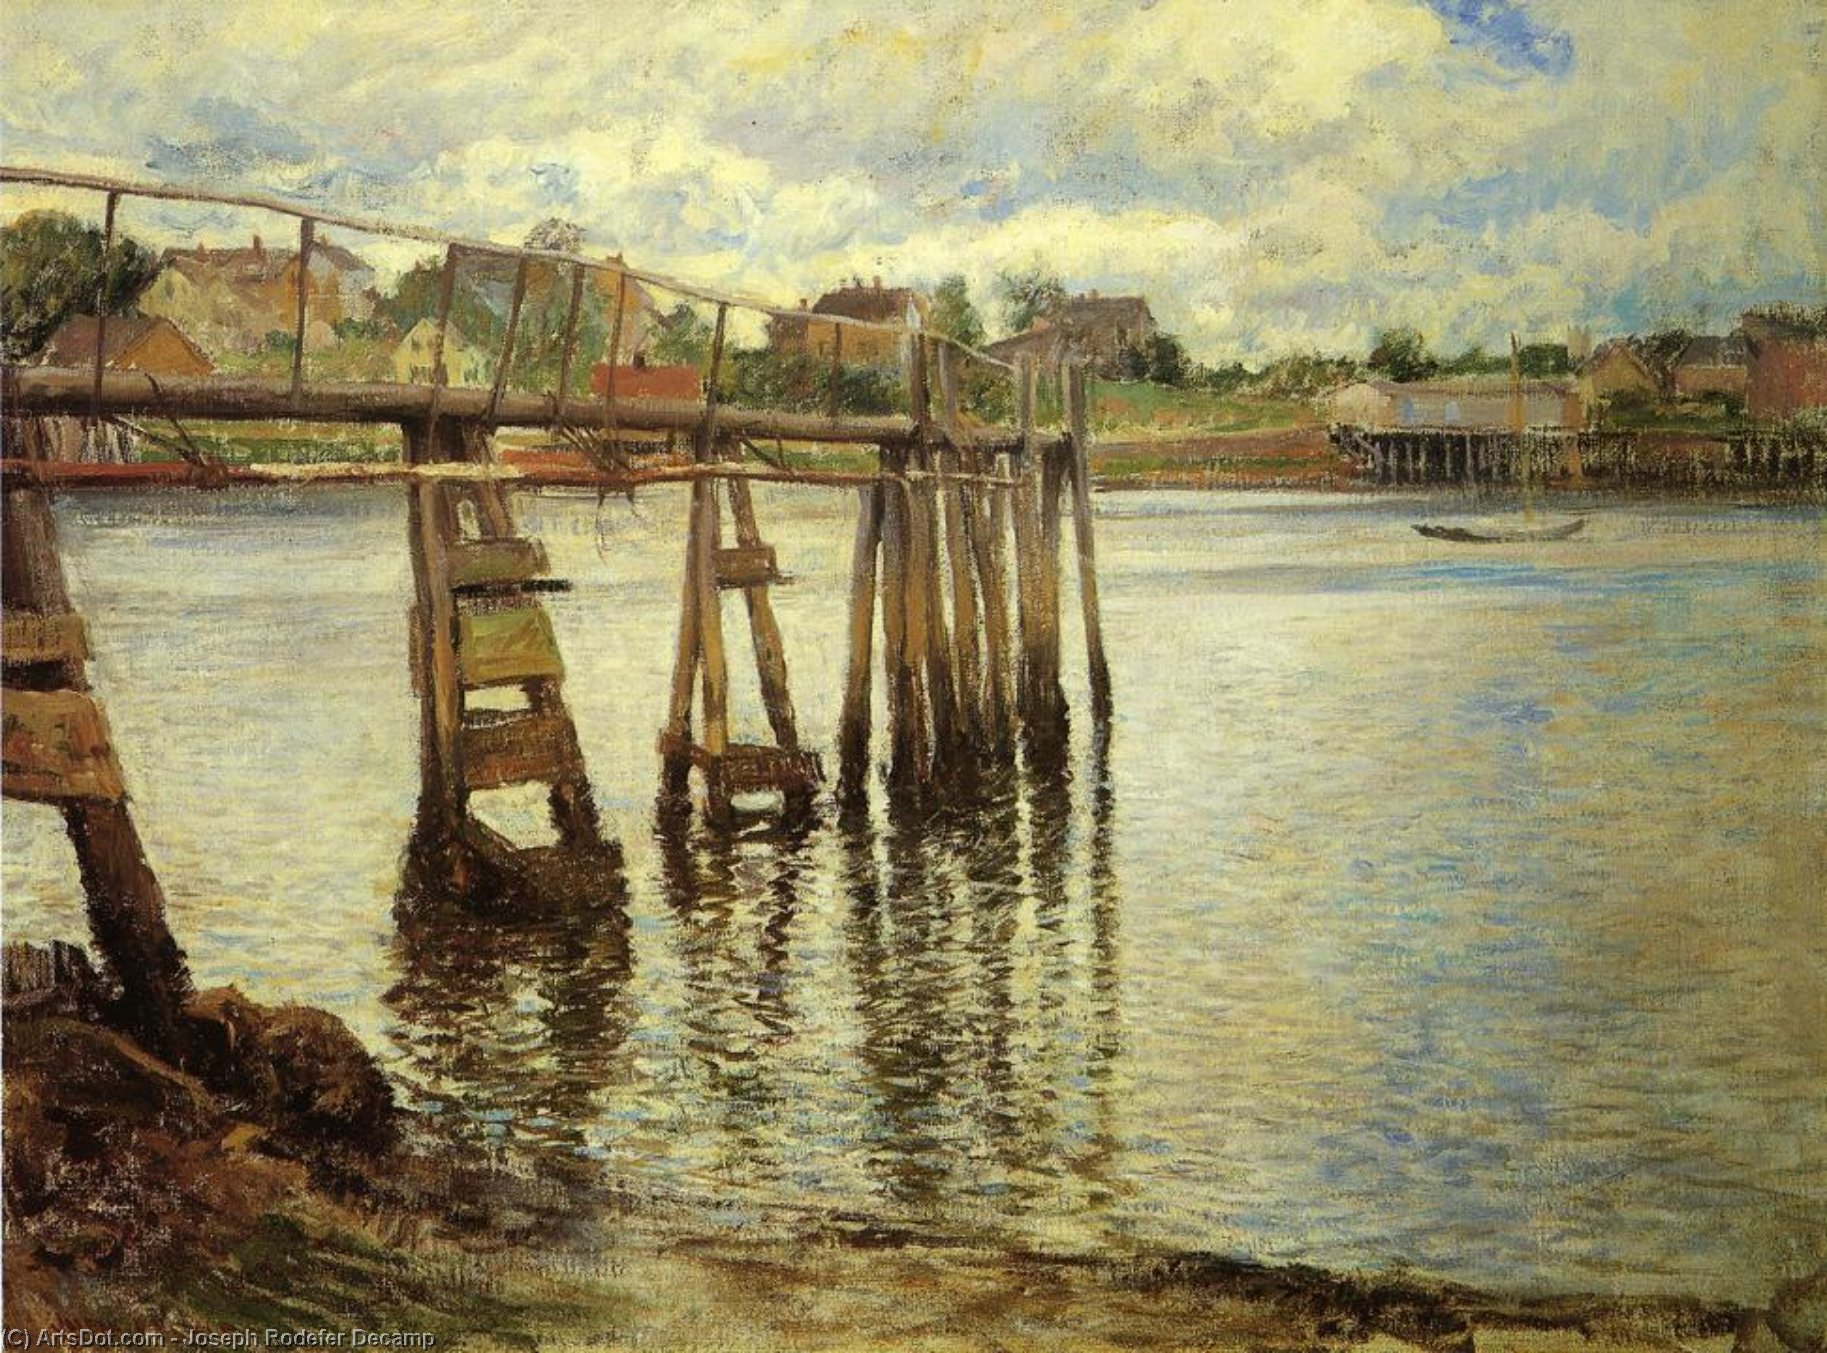 WikiOO.org - دایره المعارف هنرهای زیبا - نقاشی، آثار هنری Joseph Rodefer Decamp - Jetty at Low Tide (also known as The Water Pier)